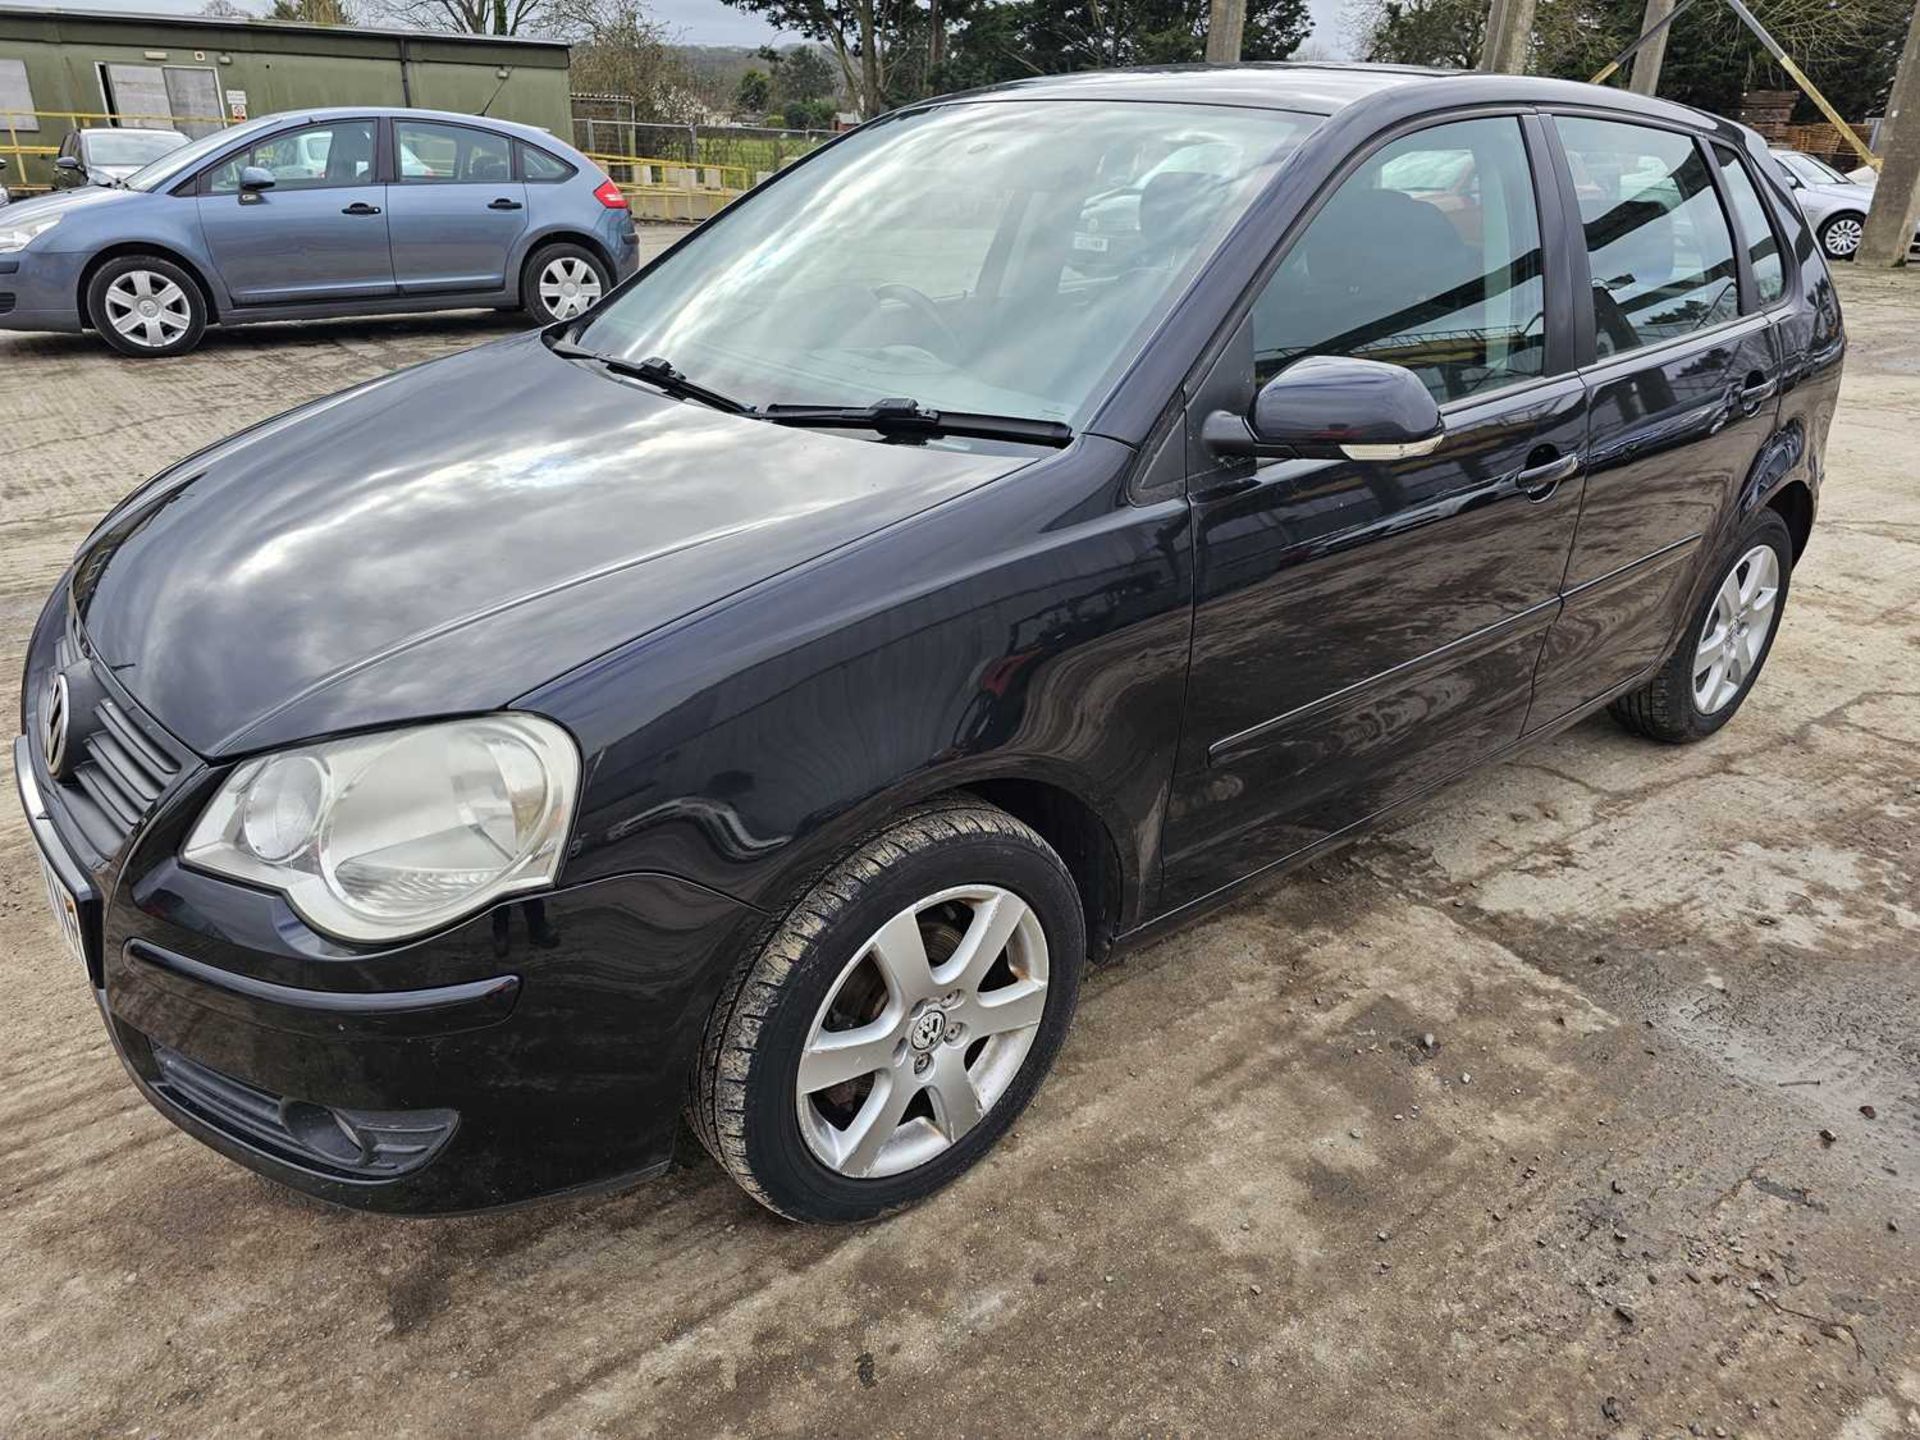 2008 Volkswagen Polo, 5 Speed, A/C (Reg. Docs. Available, Tested 05/24)